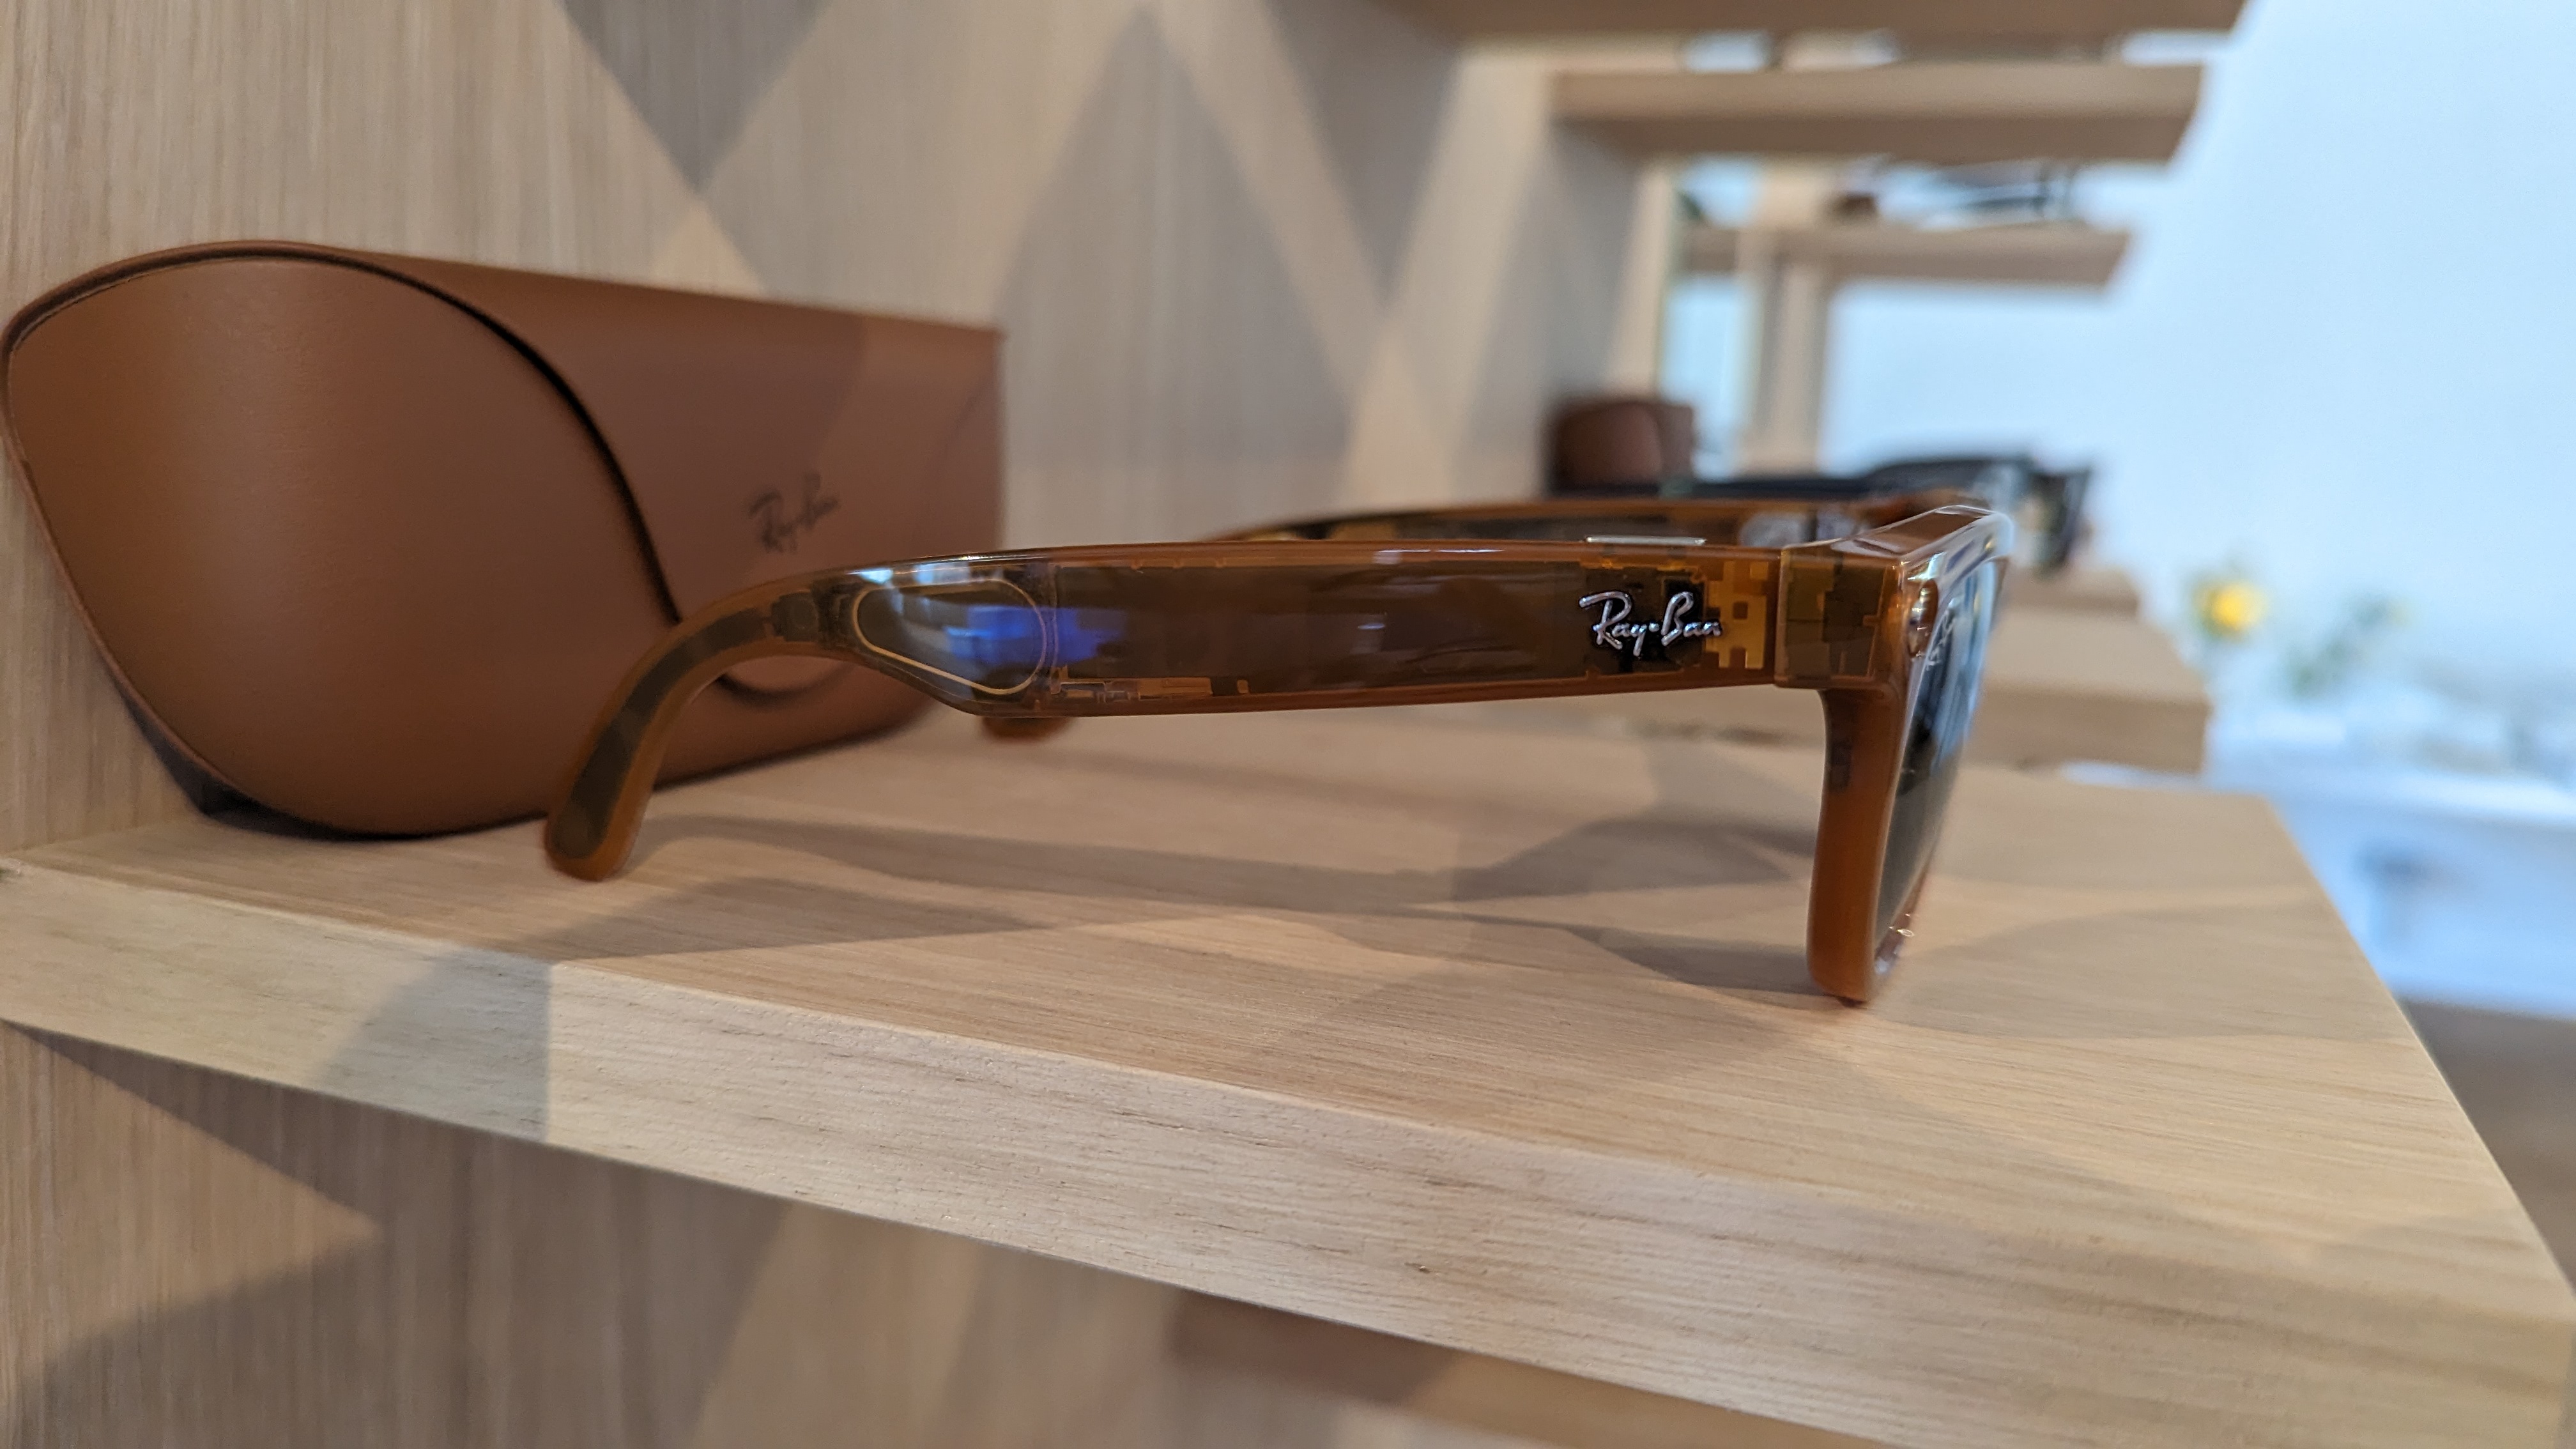 You can see inside these transparent orange frames, giving you a look at the internal componenst and spoeakers housed in the arm of the Ray-Ban and Meta smart glasses